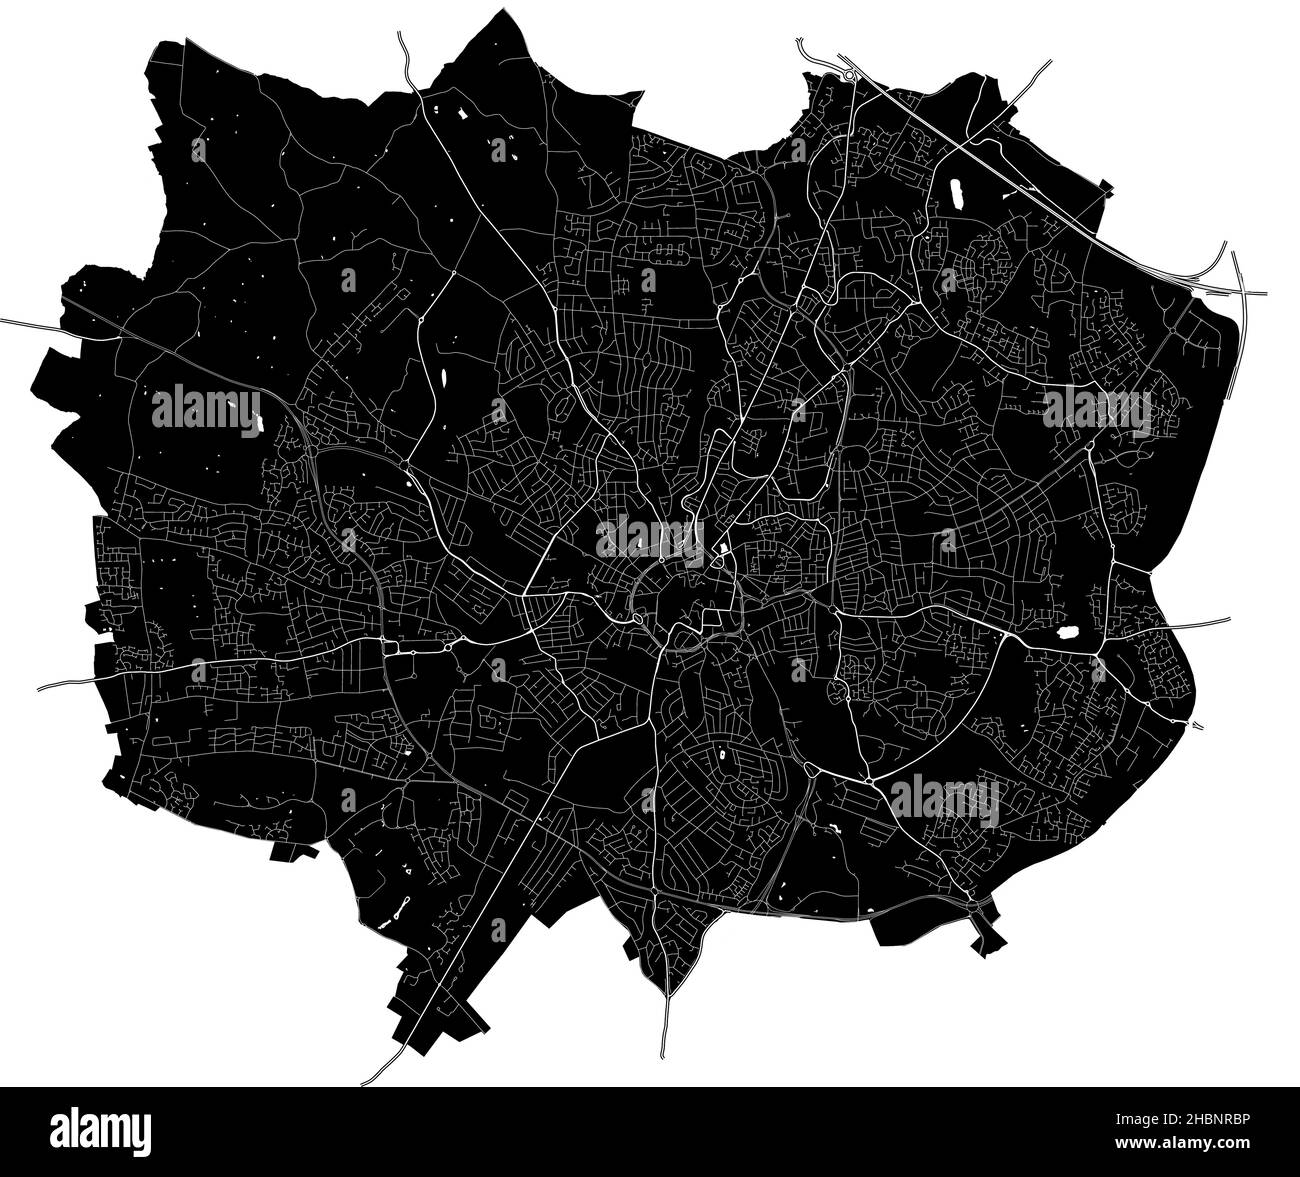 Coventry, England, high resolution vector map with city boundaries, and editable paths. The city map was drawn with white areas and lines for main roa Stock Vector